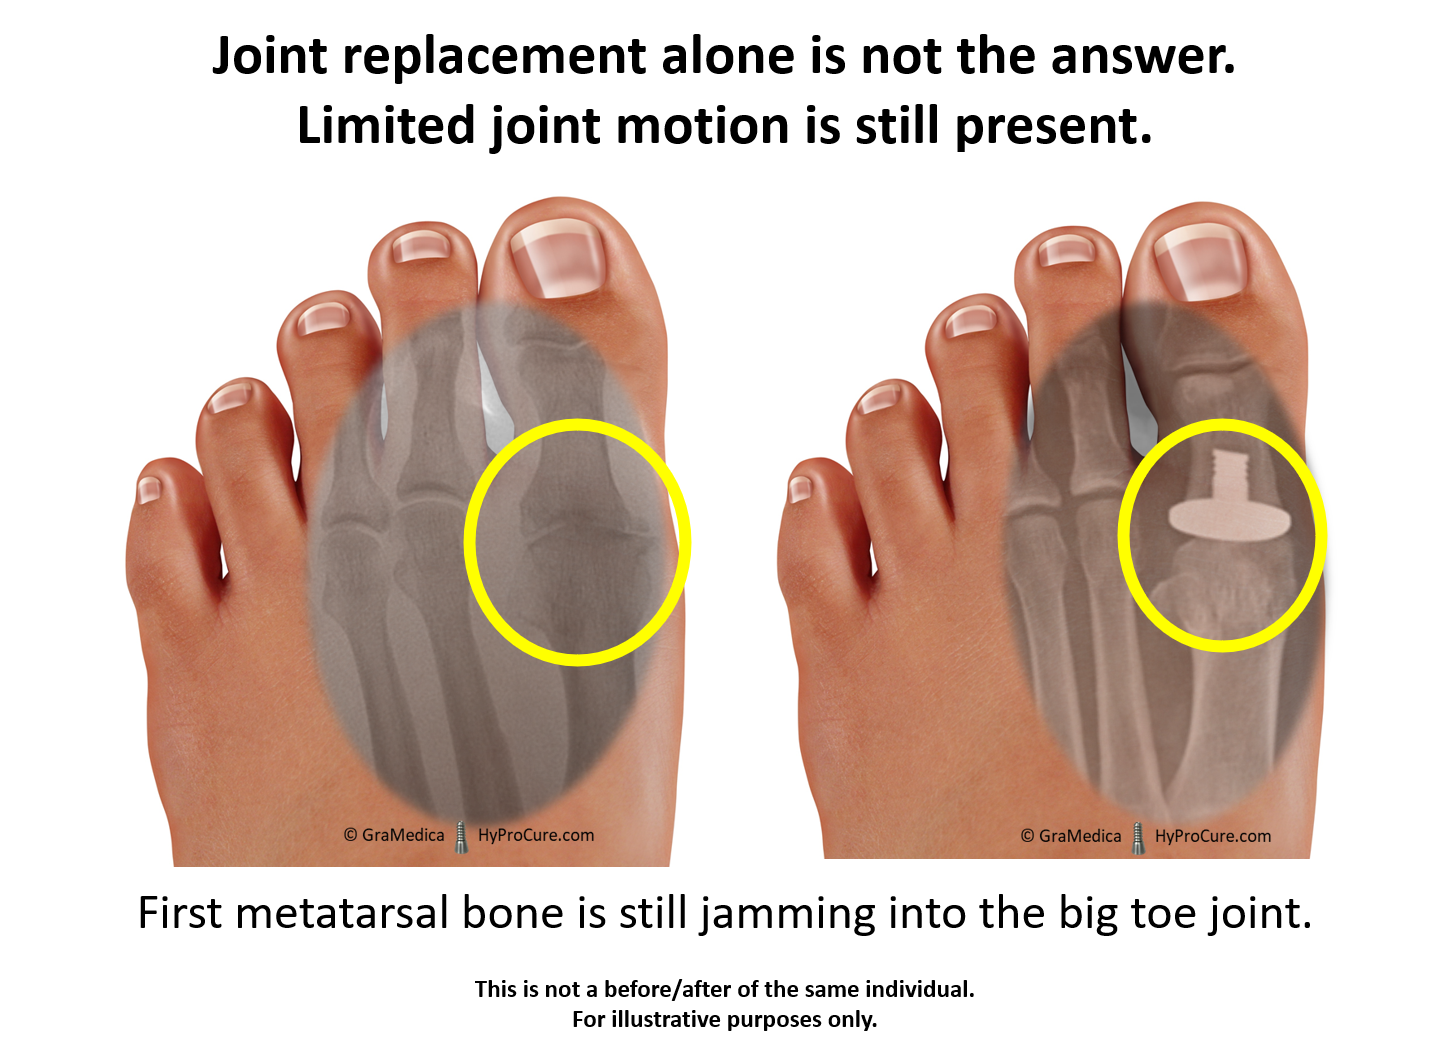 How to avoid toe jam, that icky buildup between your toes